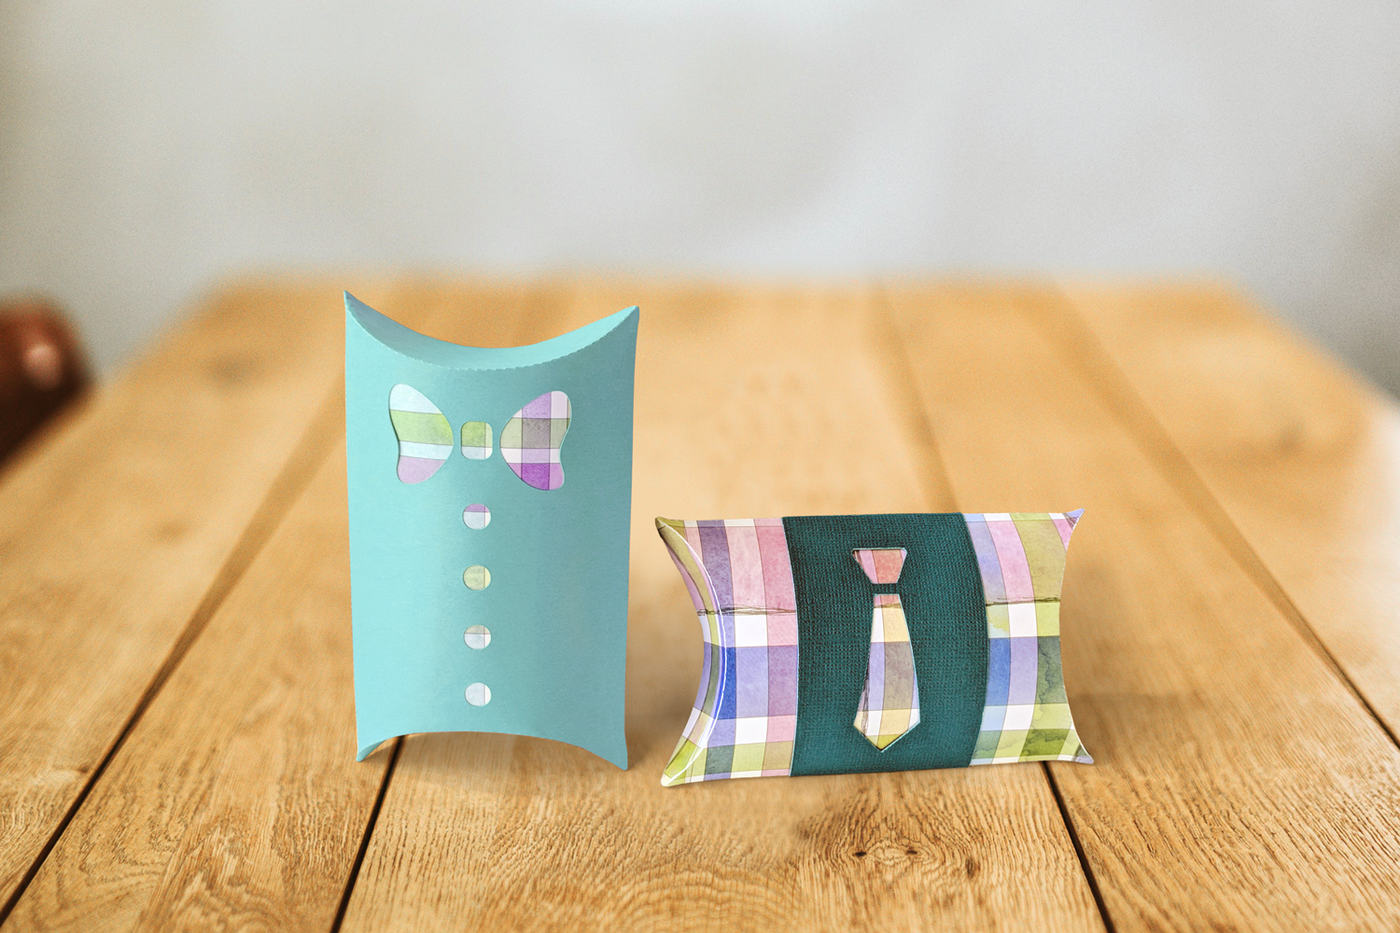 Two pillow boxes on a wood table. The left box has a bowtie and buttons cutout revealing plaid paper underneath. The right box is plaid with a band that has a necktie cutout that shows the pattern of the box through the hole.